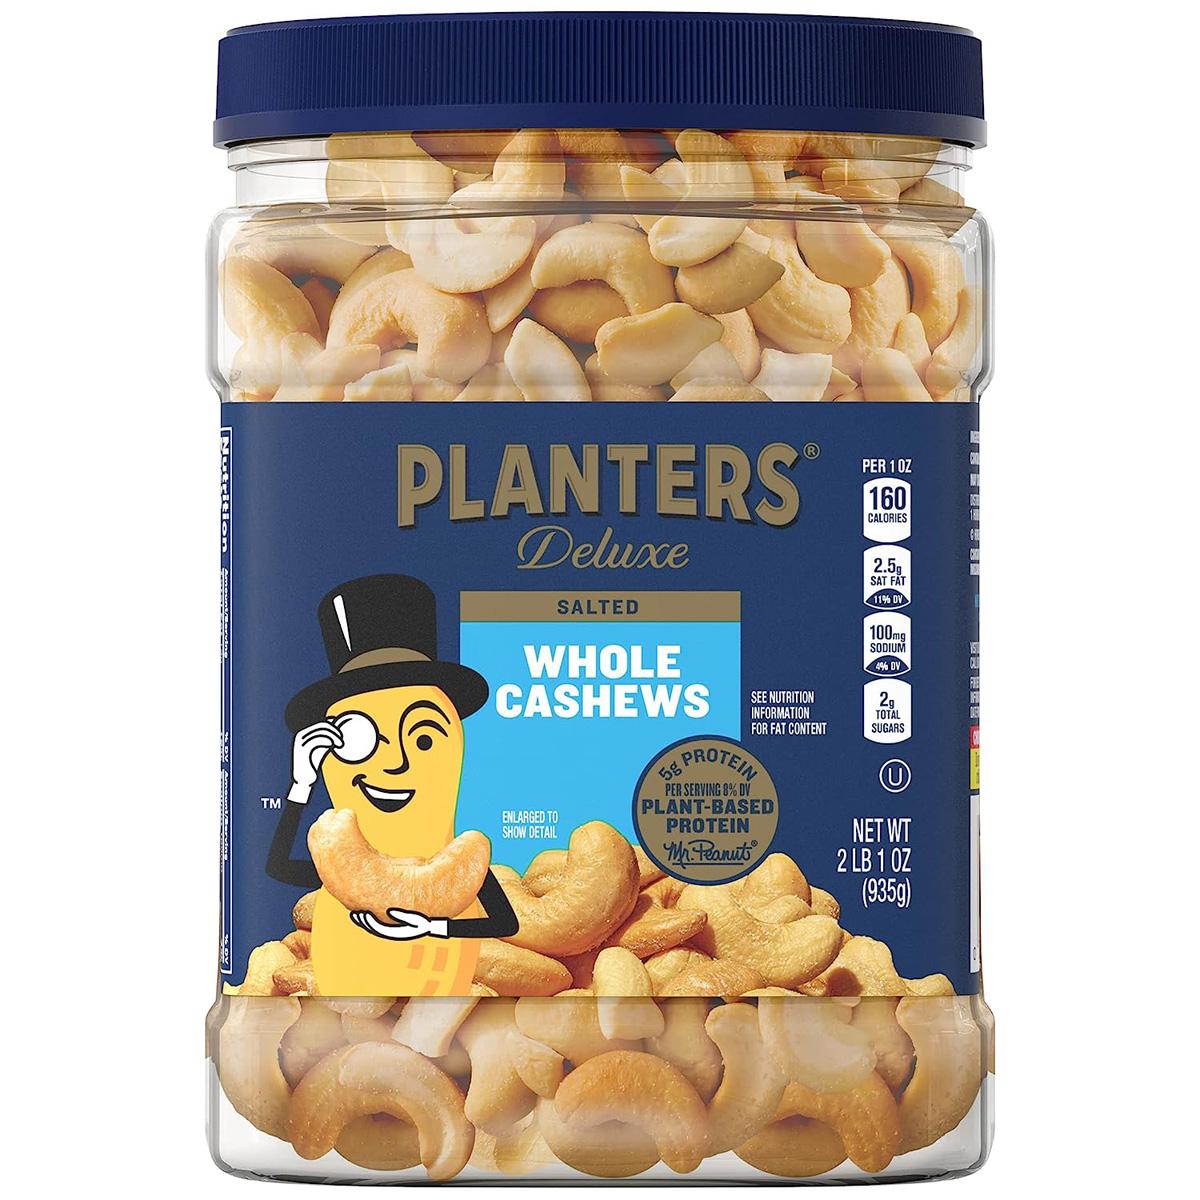 Planters Deluxe Salted Whole Cashews for $10.72 Shipped